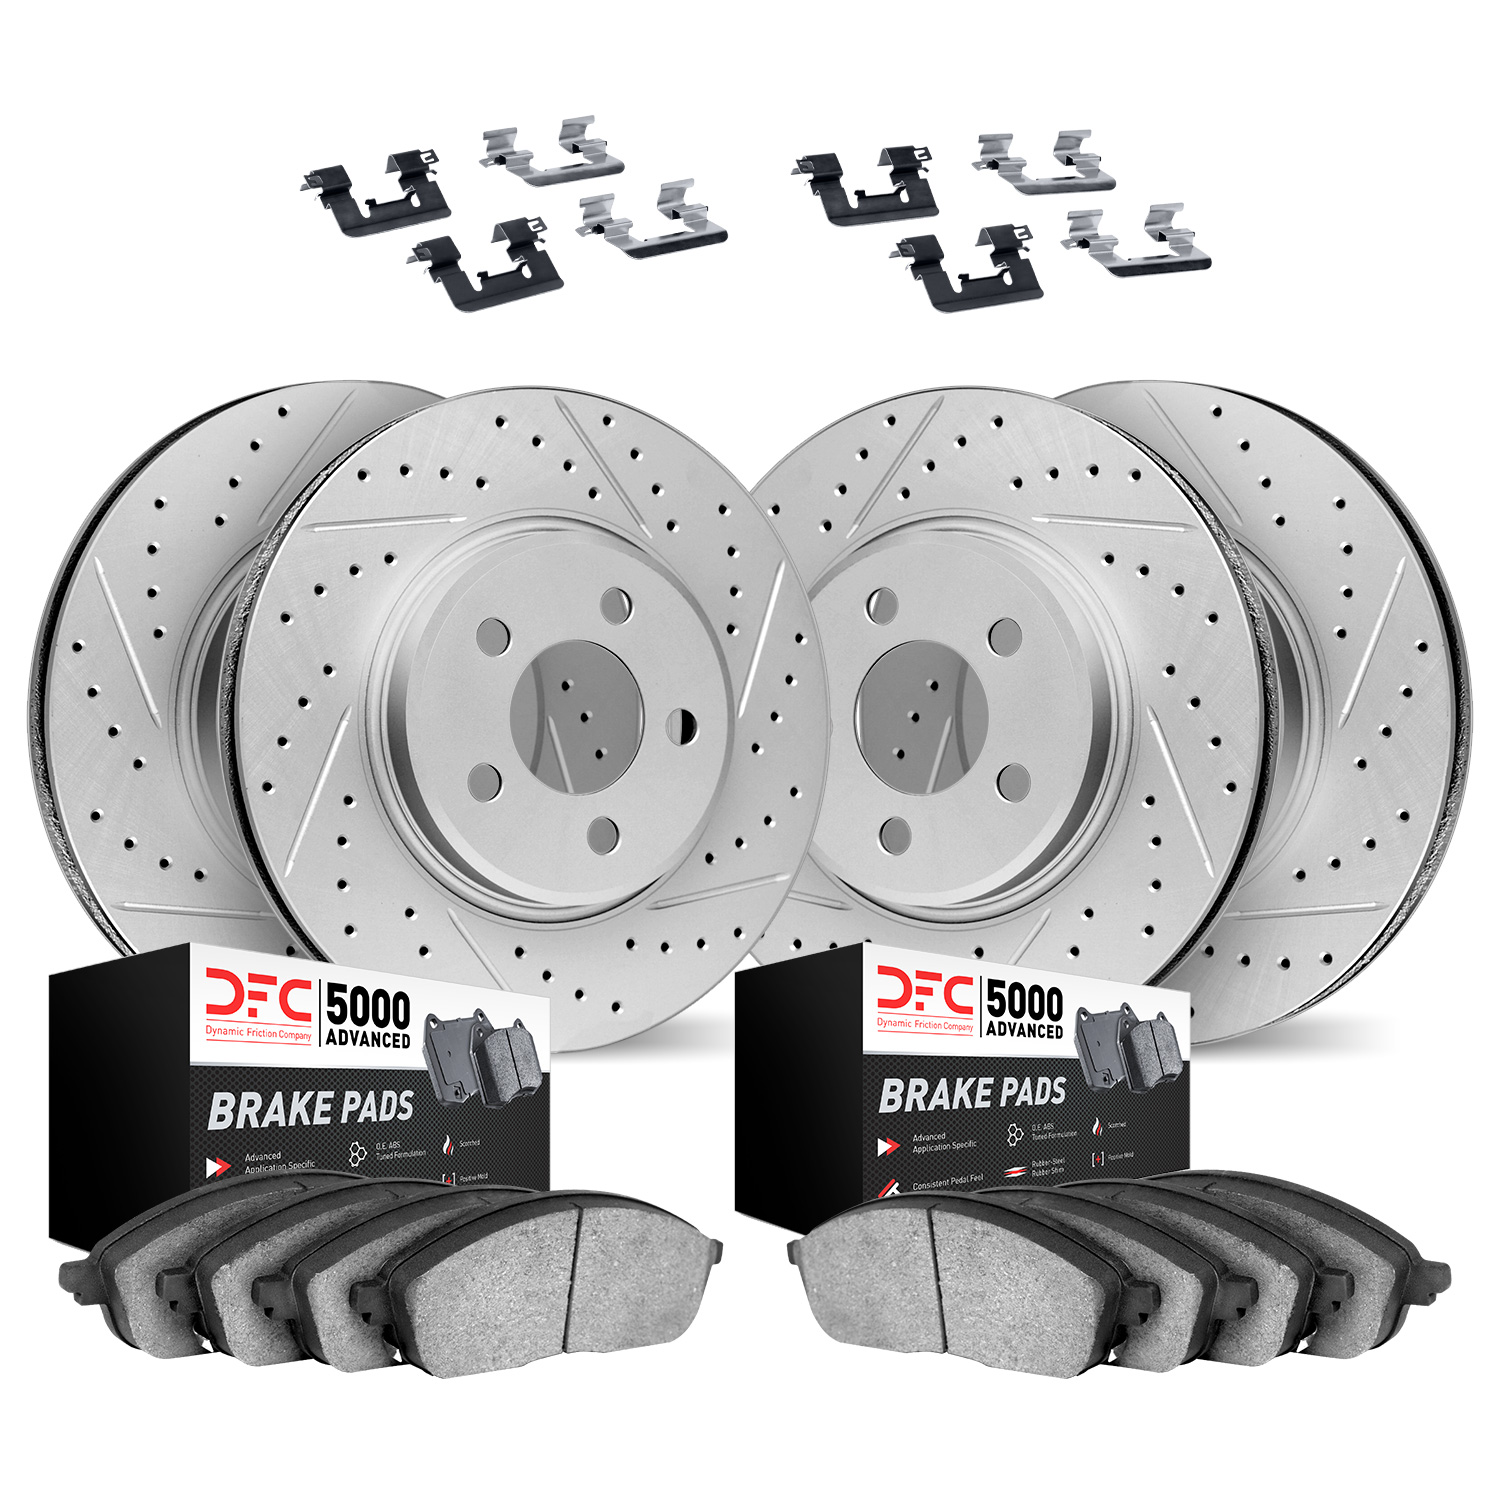 2514-13020 Geoperformance Drilled/Slotted Rotors w/5000 Advanced Brake Pads Kit & Hardware, Fits Select Subaru, Position: Front